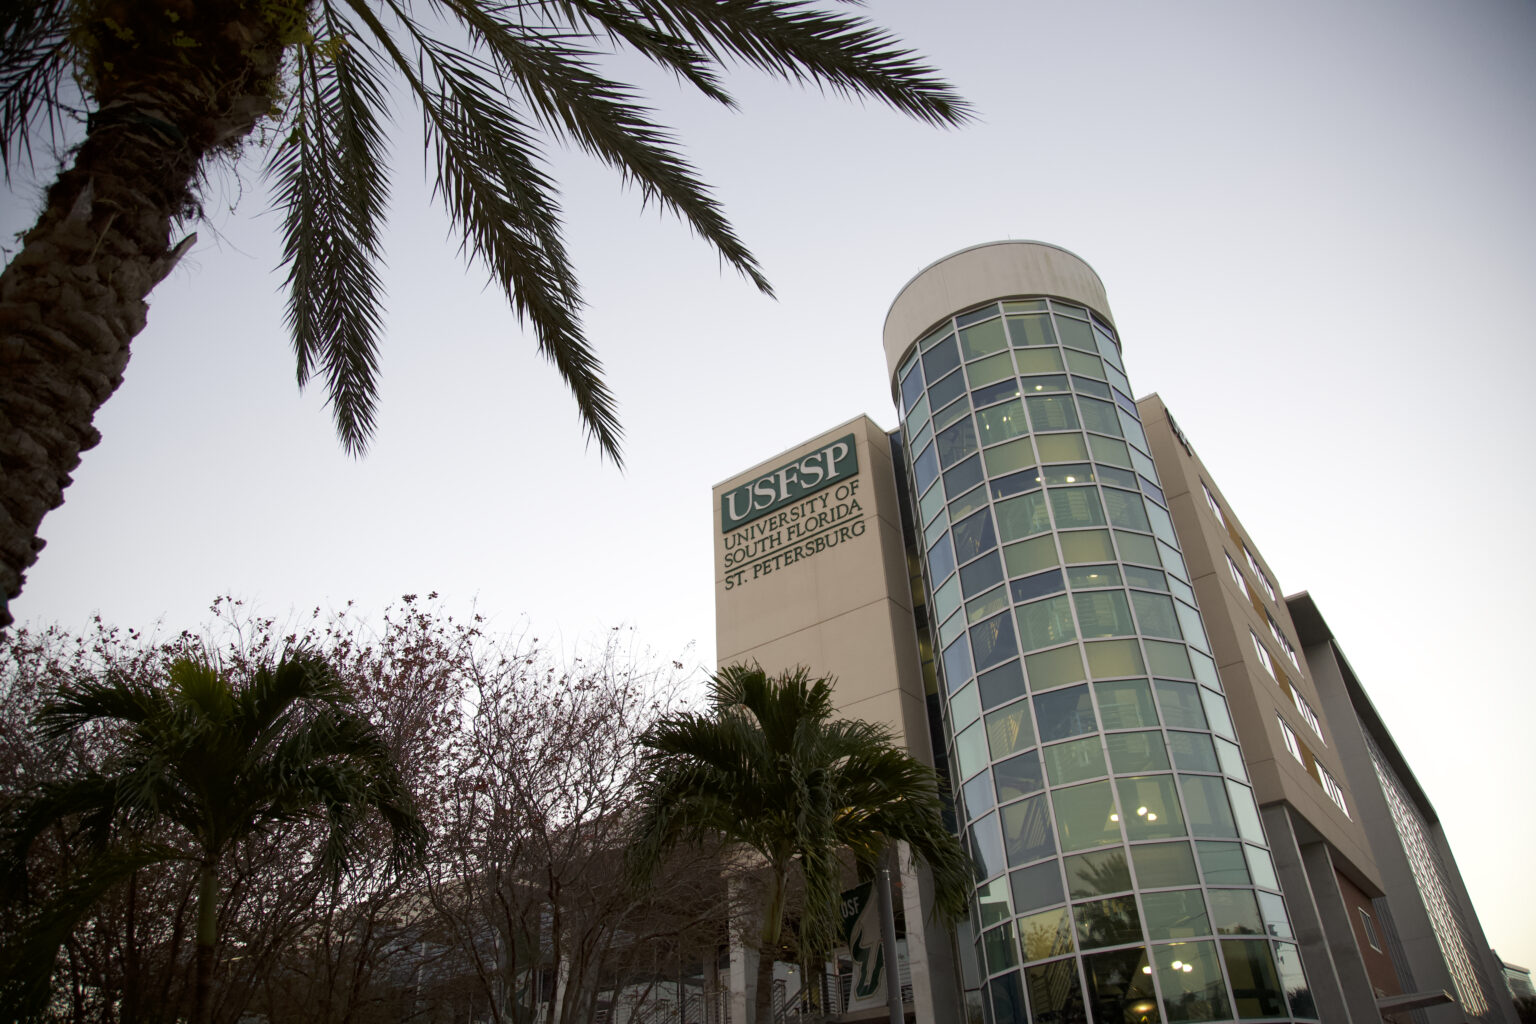 USF researchers to study effects of structural racism within St. Petersburg institutions